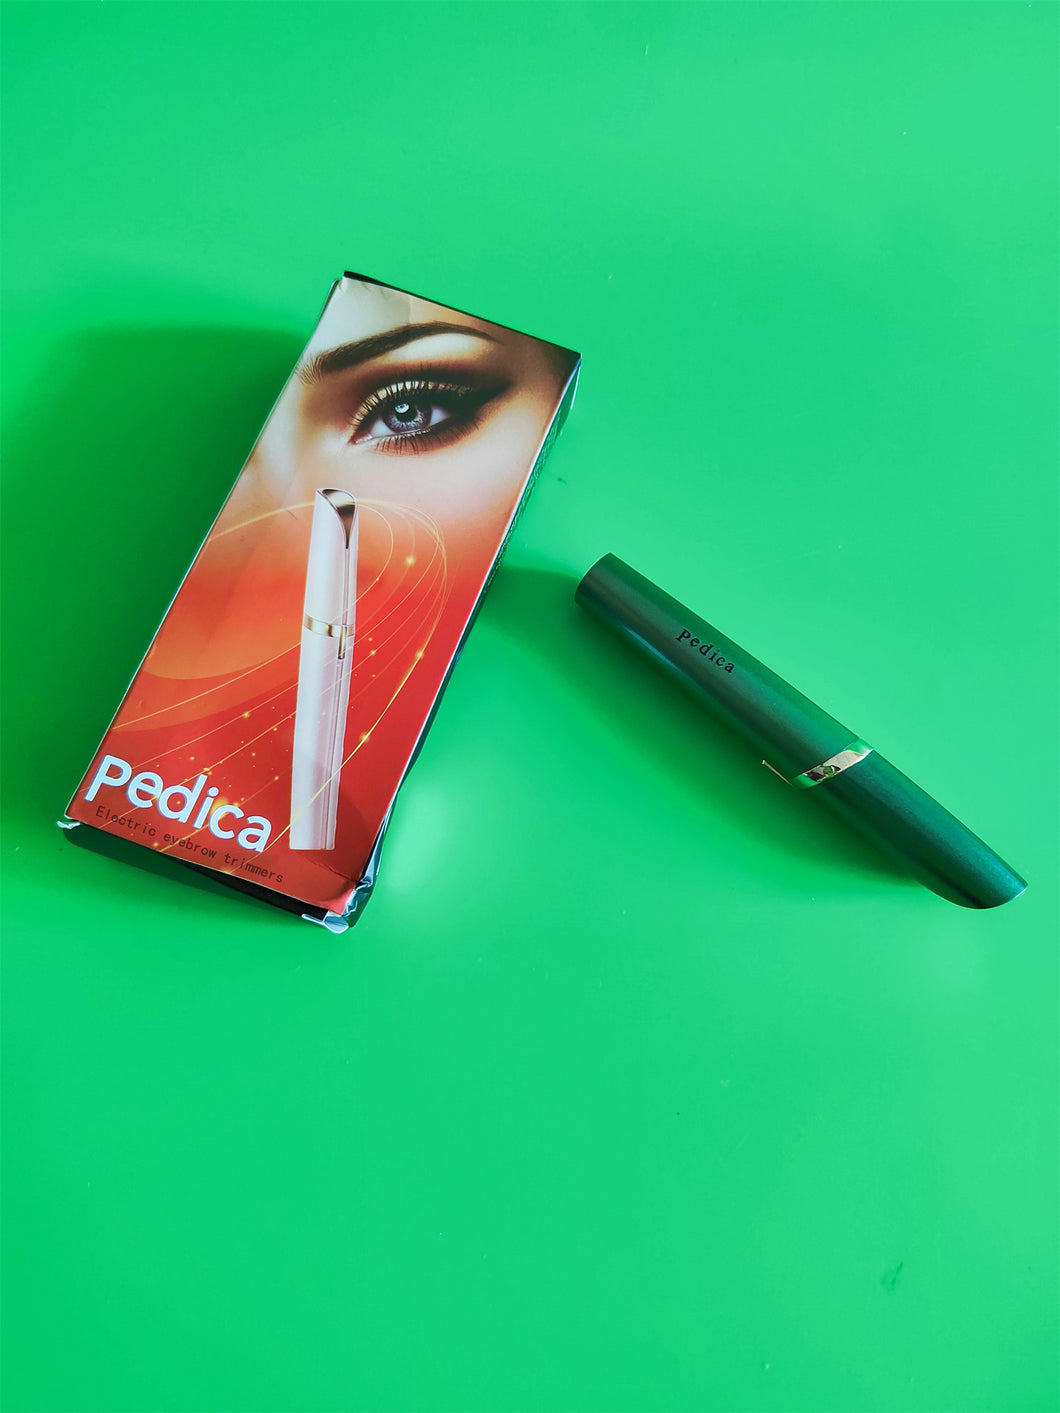 Pedica Electric eyebrow trimmer, a painless portable eyebrow trimmer